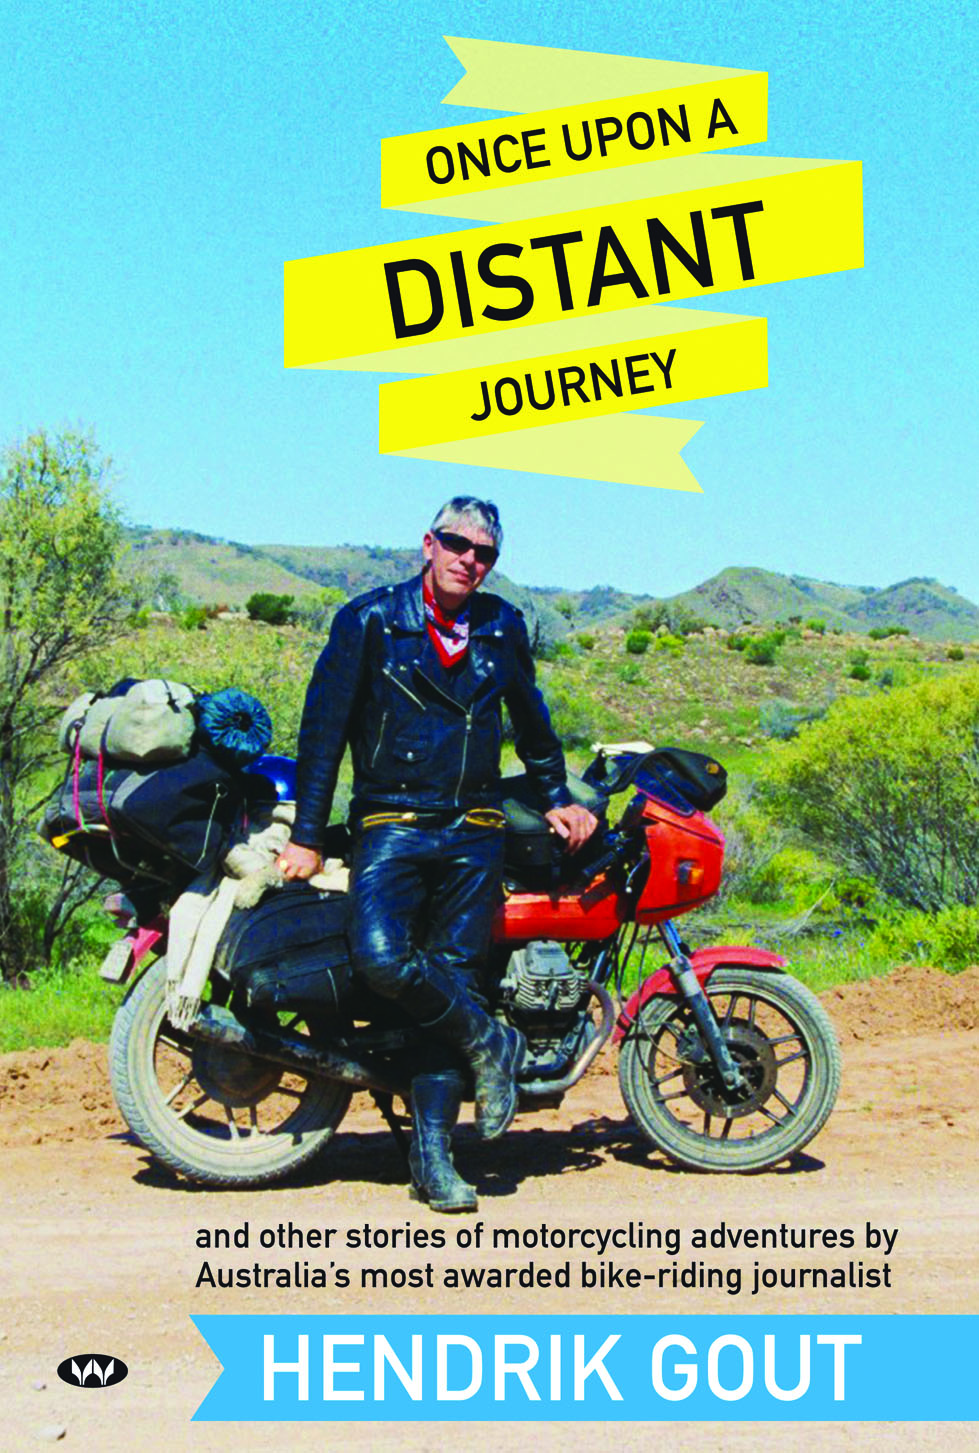 Once Upon a Distant Journey by Hendrik Gout motorcycle experiences around Australia